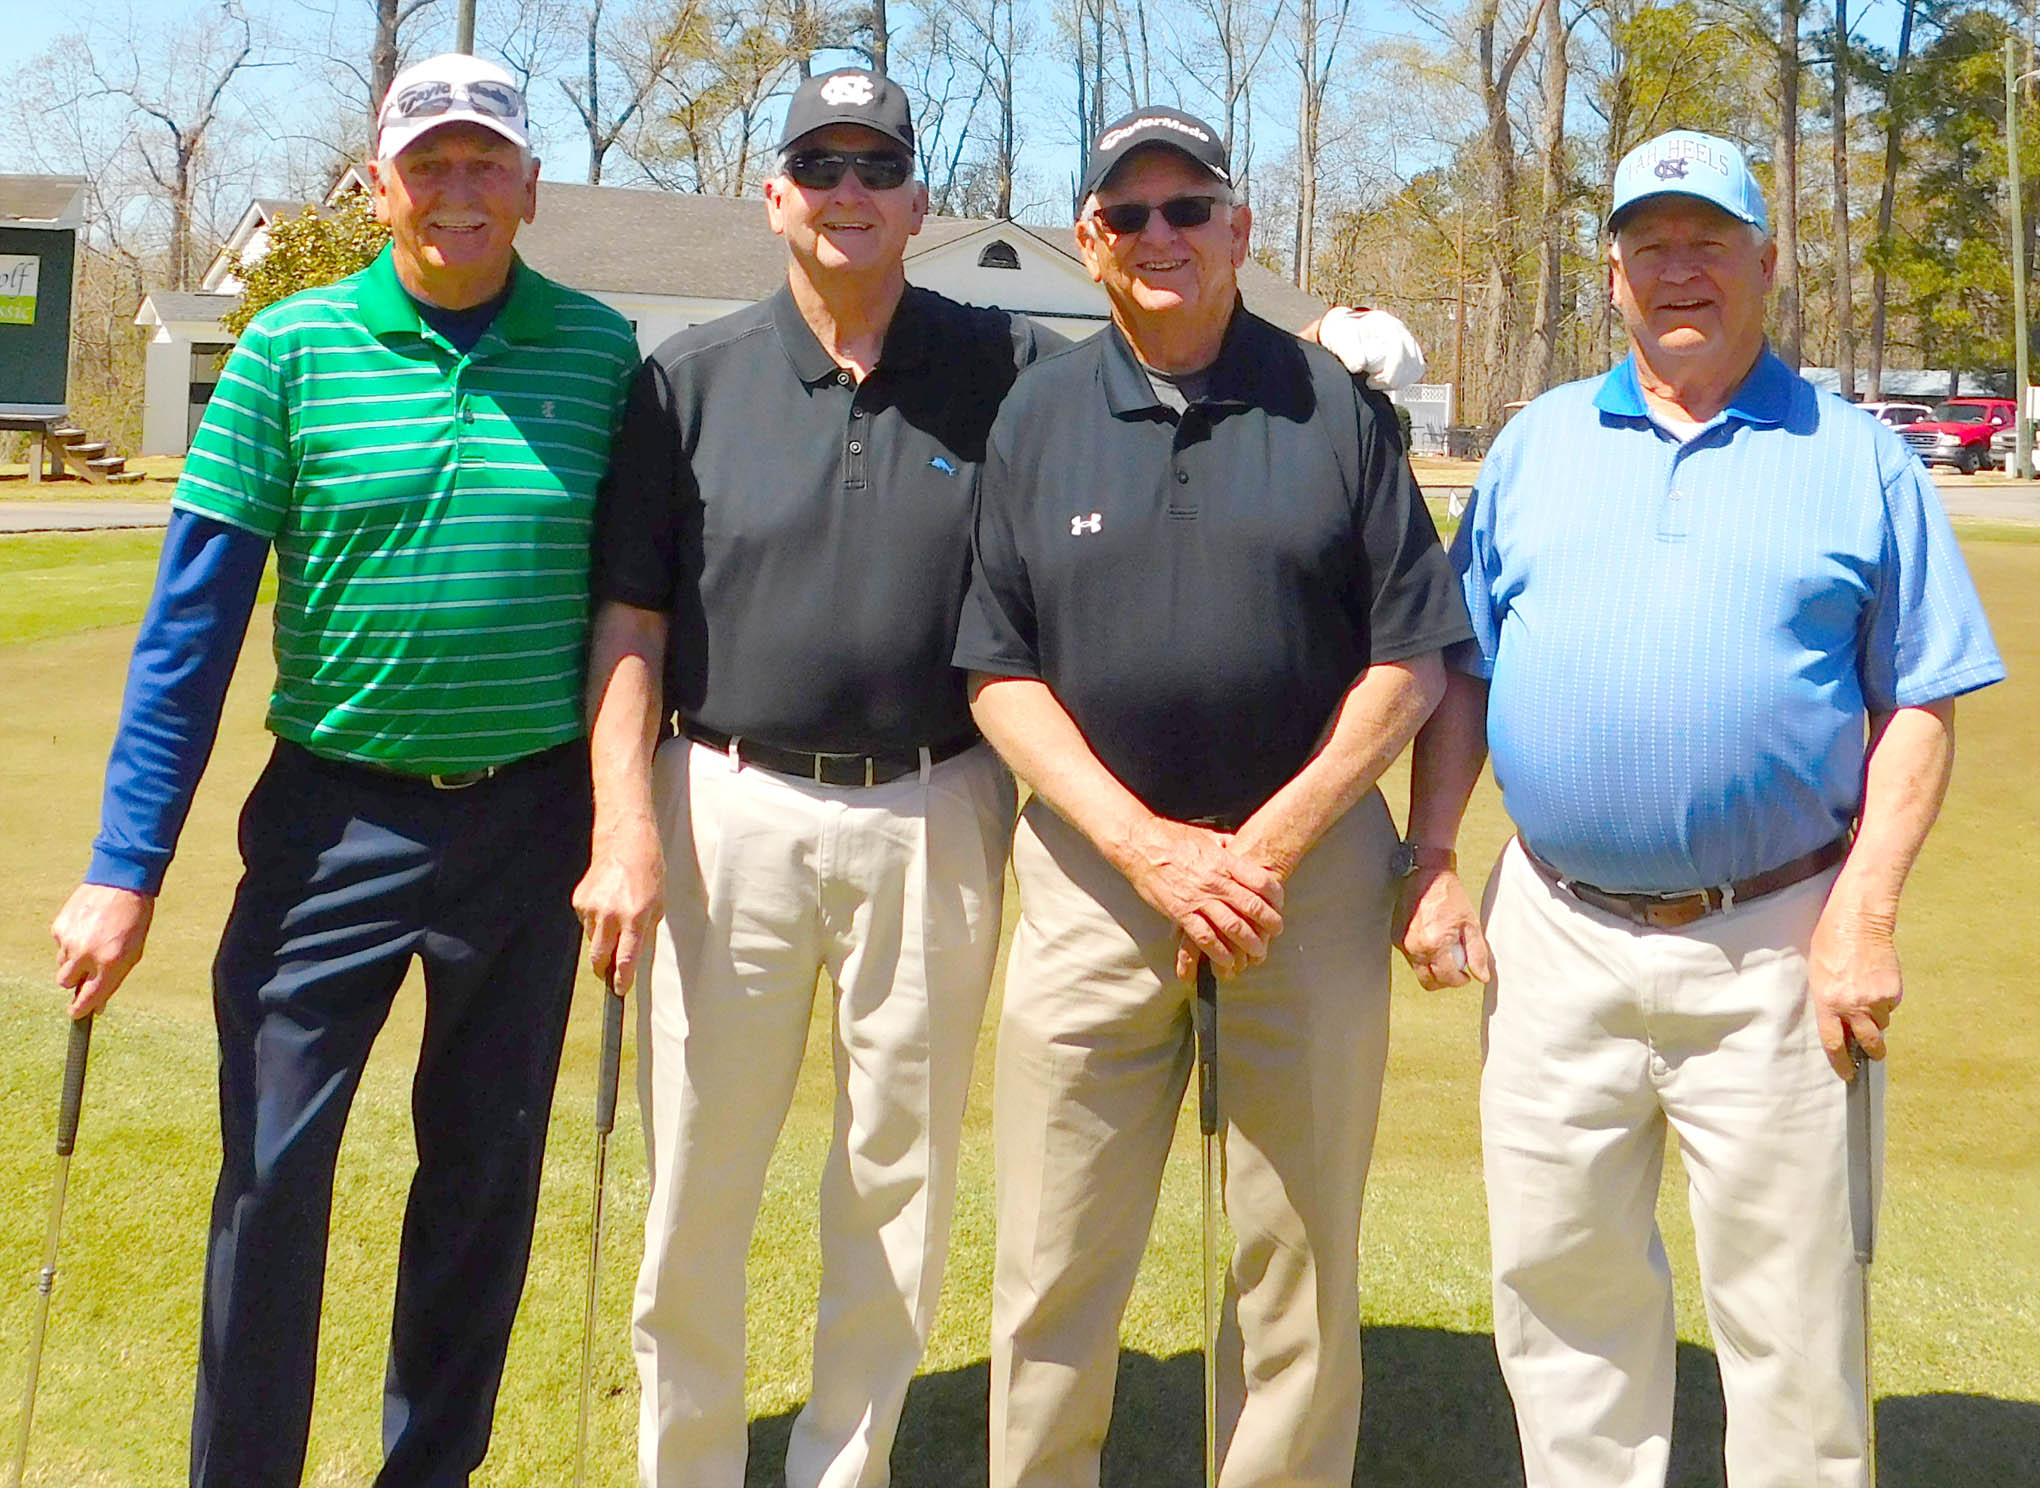 Click to enlarge,  Members of the first flight second-place team in the sixth Central Carolina Community College Foundation Harnett Golf Classic were Johnny Badgett, Larry Badgett, Kenneth Parker, and Jeff Wilson. For information about the Foundation, donating to it, establishing a scholarship, or other fund-raising events, contact Dr. Emily Hare, Executive Director of the CCCC Foundation, 919-718-7230. Information is also available at the CCCC Foundation website, www.cccc.edu/foundation. 